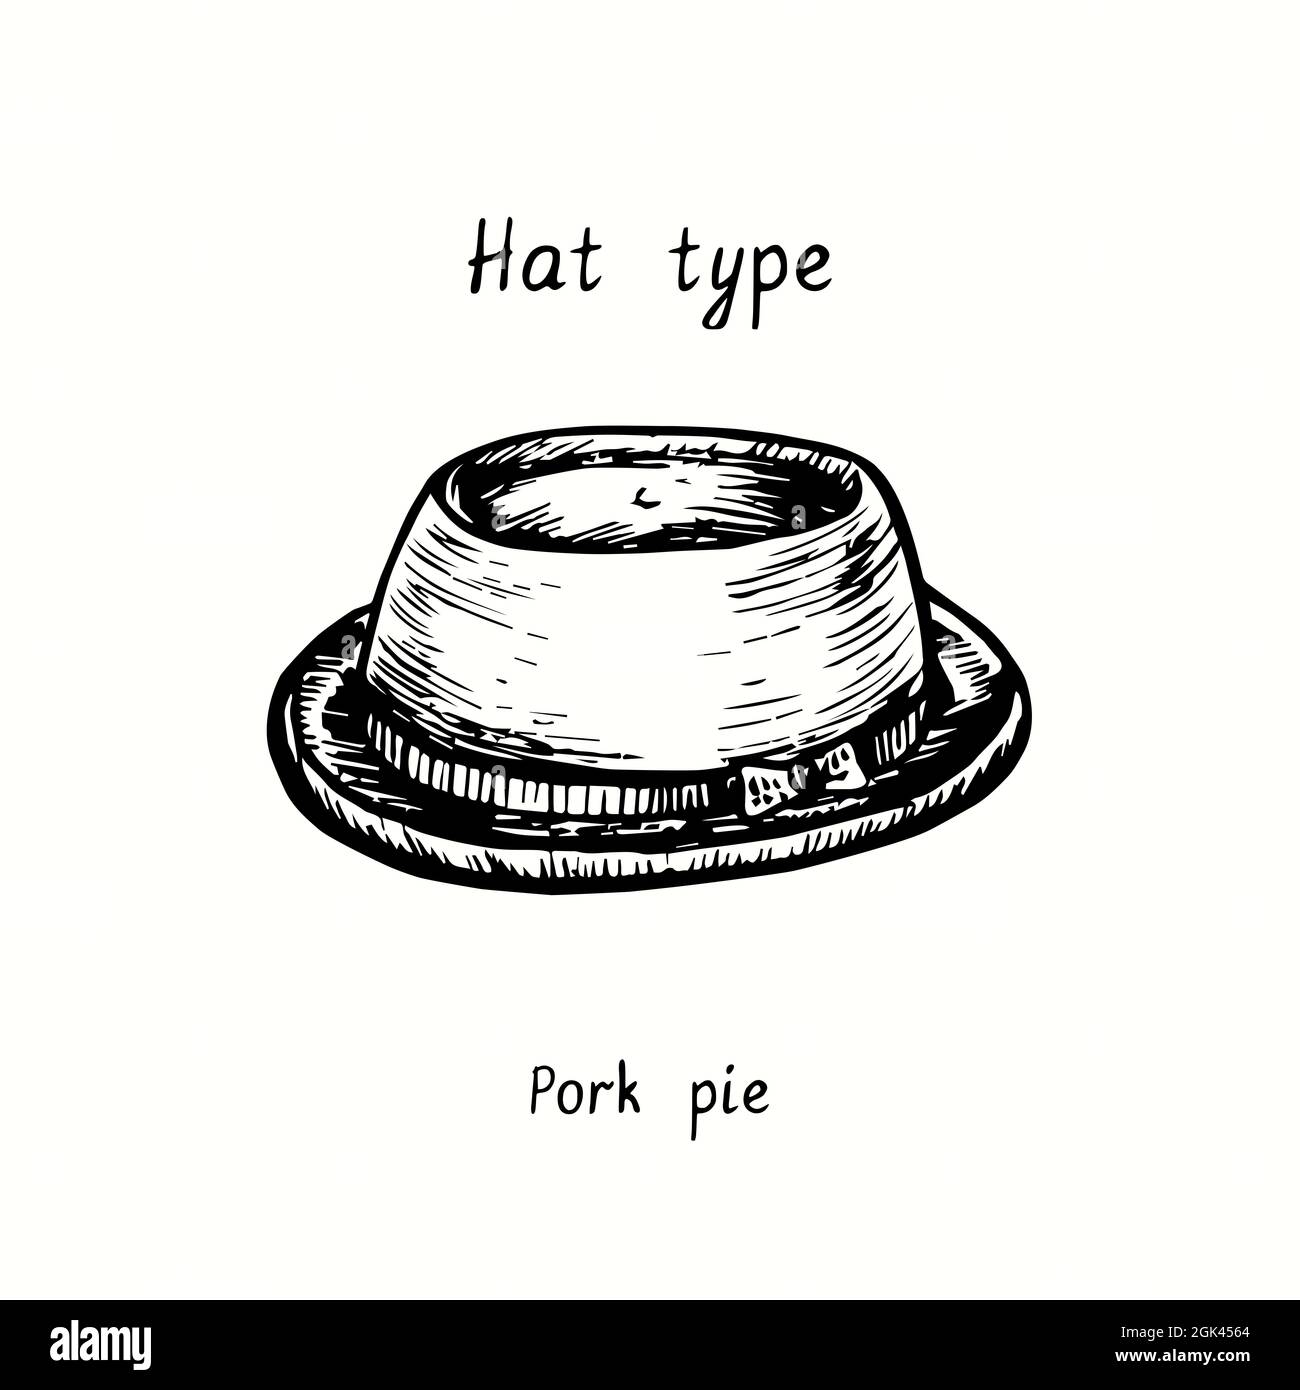 Hat type, pork pie. Ink black and white drawing outline illustration Stock Photo